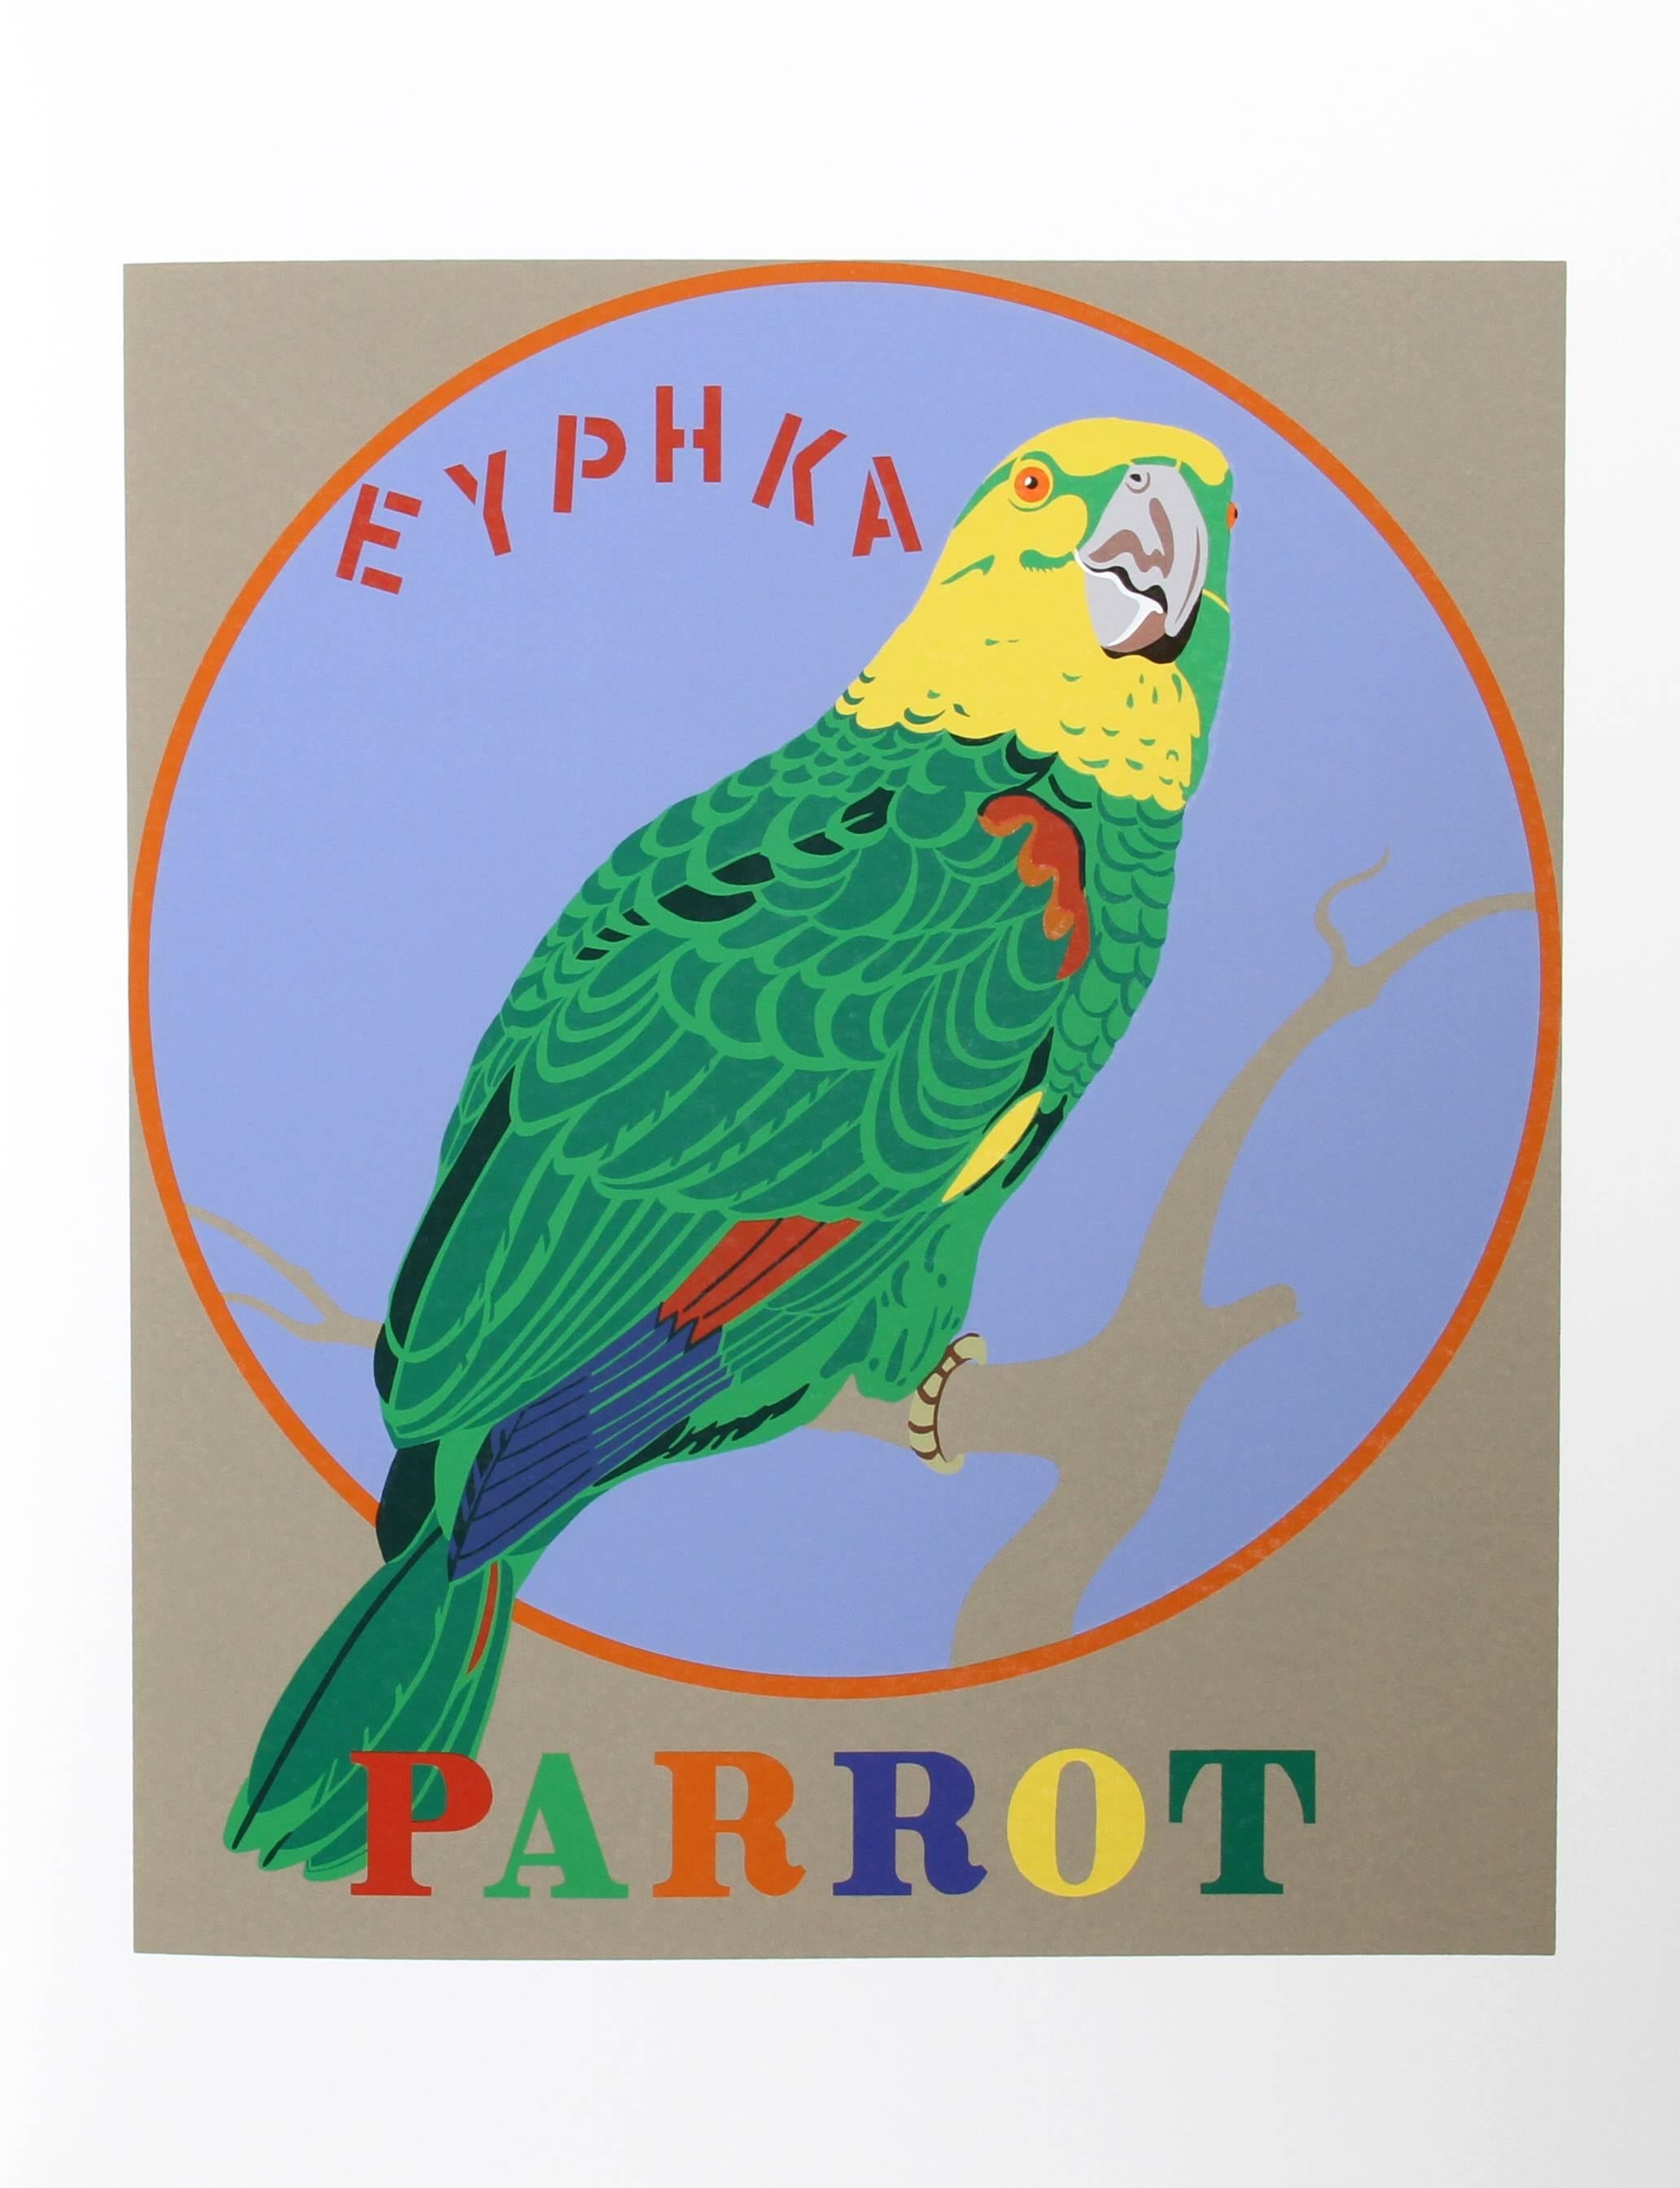 "Parrot", from the American Dream Portfolio by Robert Indiana